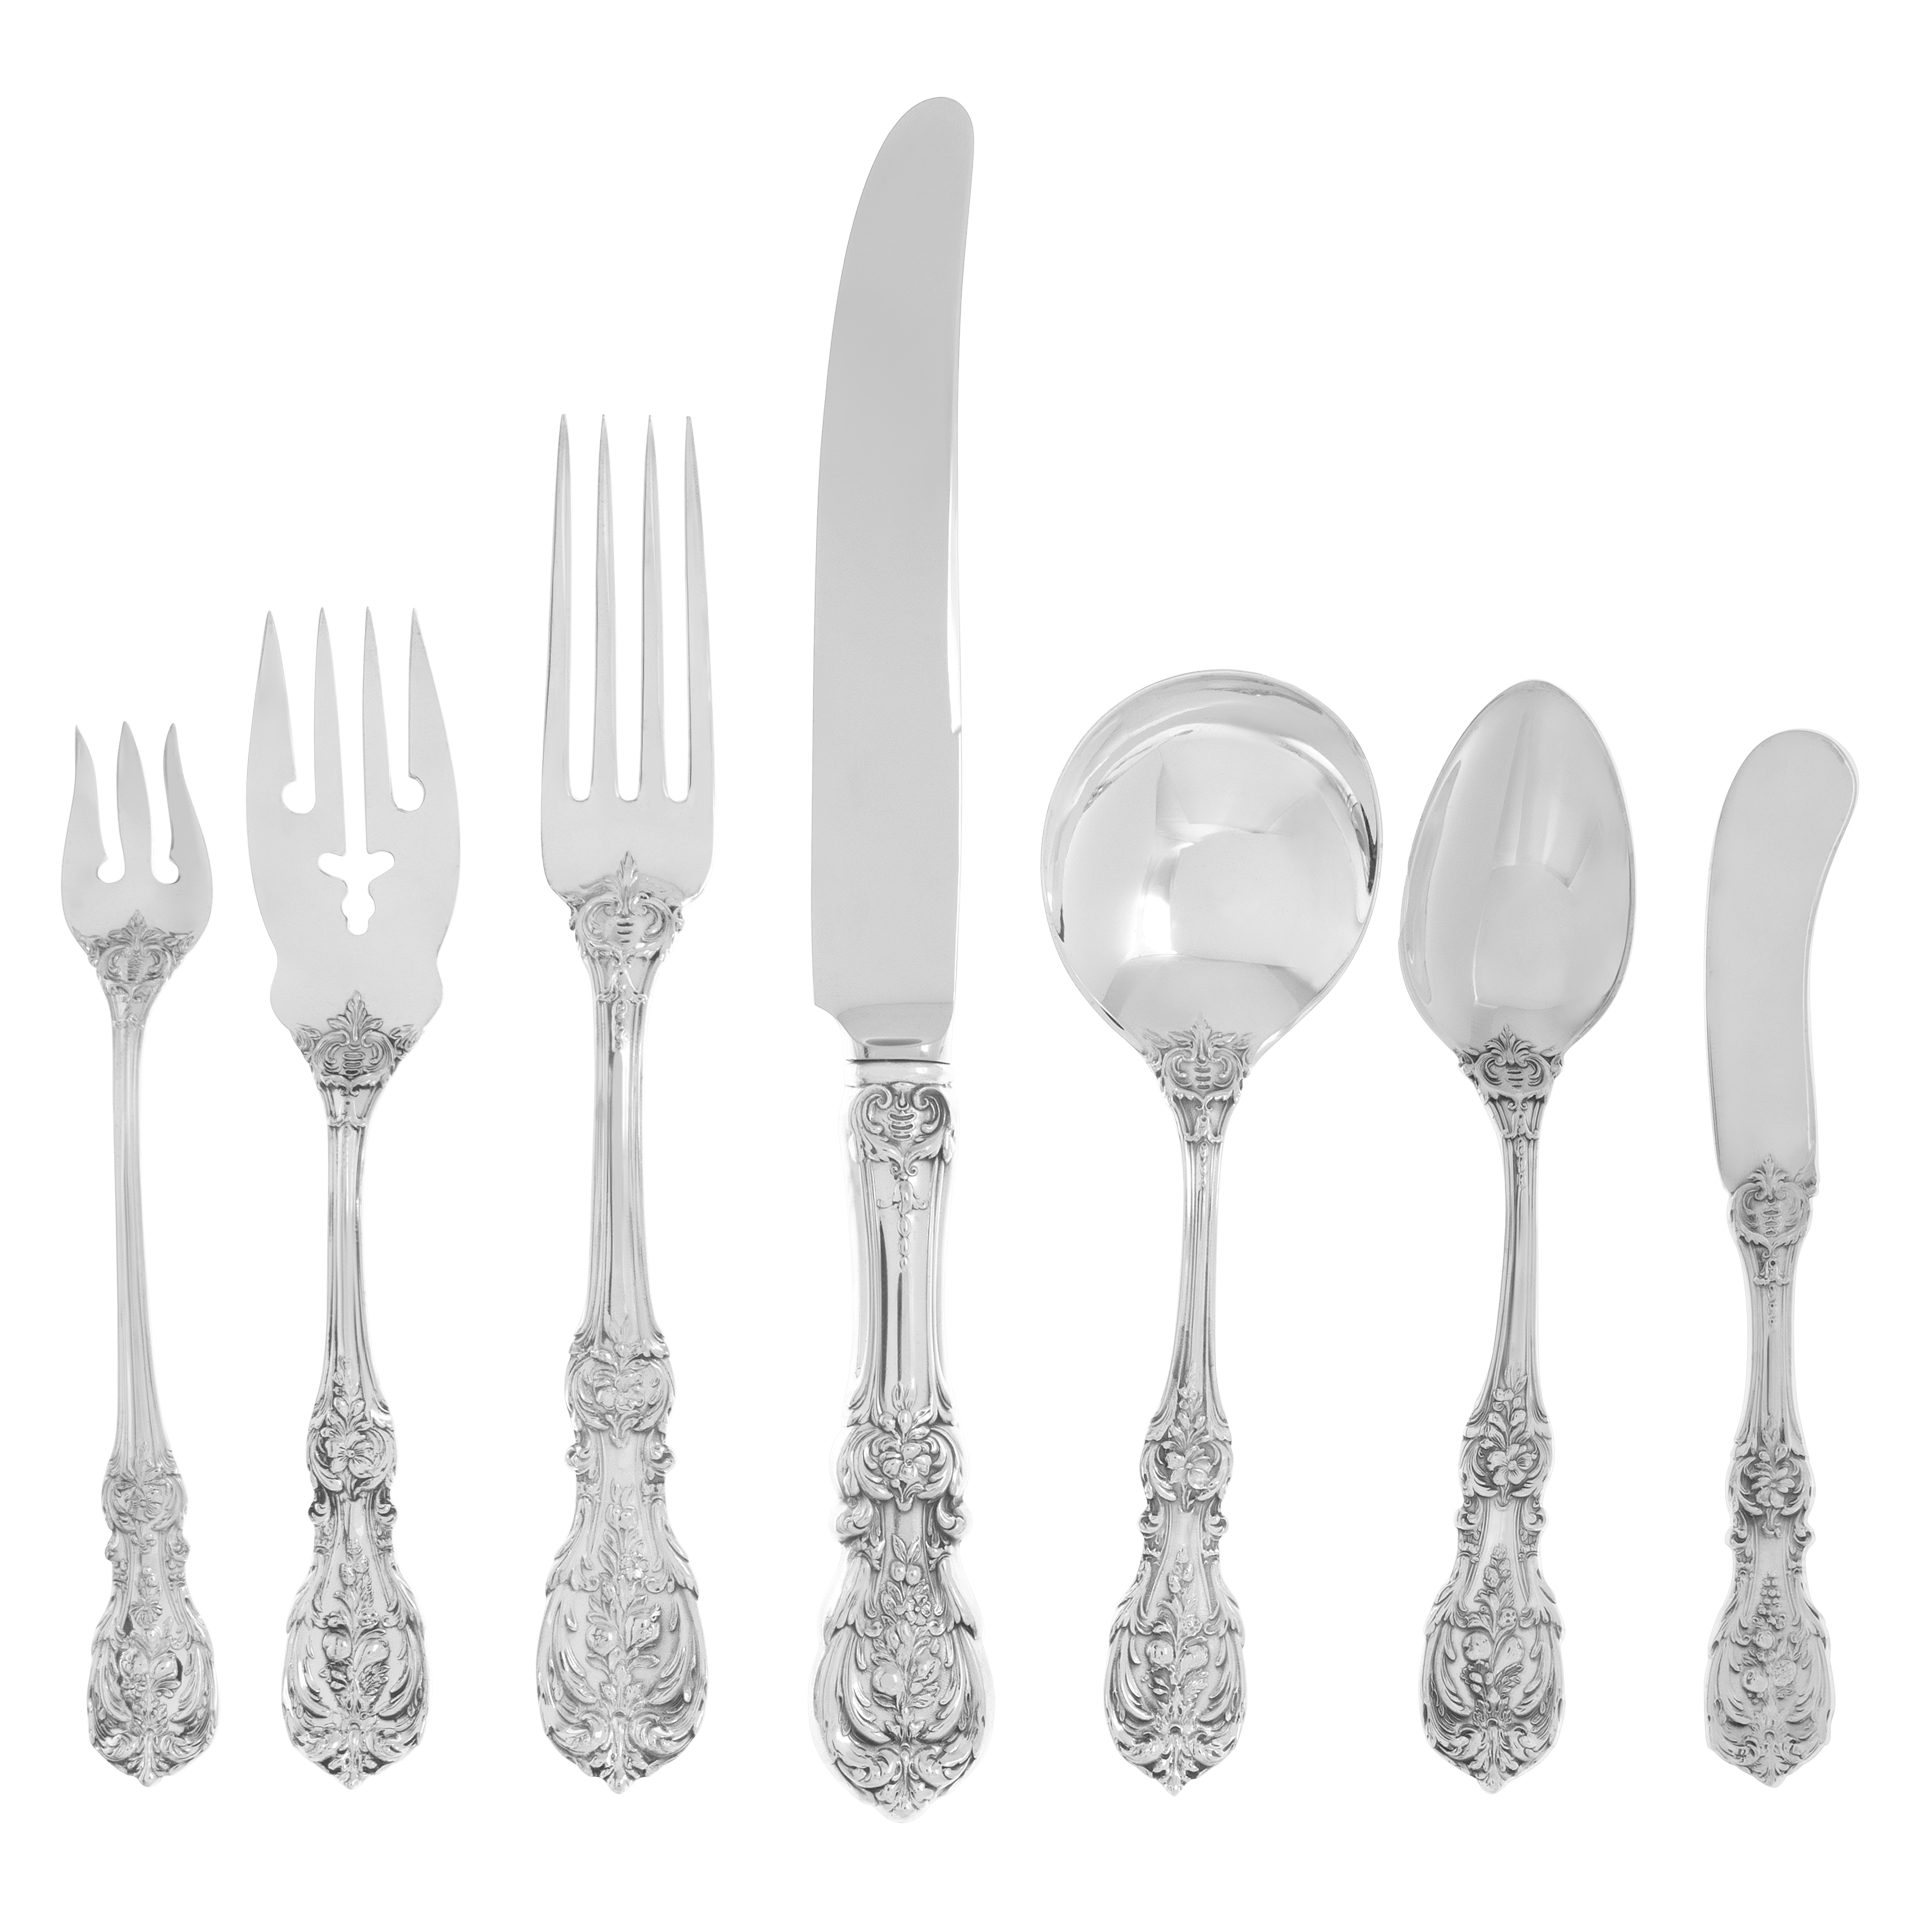 FRANCIS THE FIRST sterling silver flatware set patented in 1907 by Reed & Barton. 57 pieces- 4 place set for 7 (and xtras)+ 6 serving pieces.